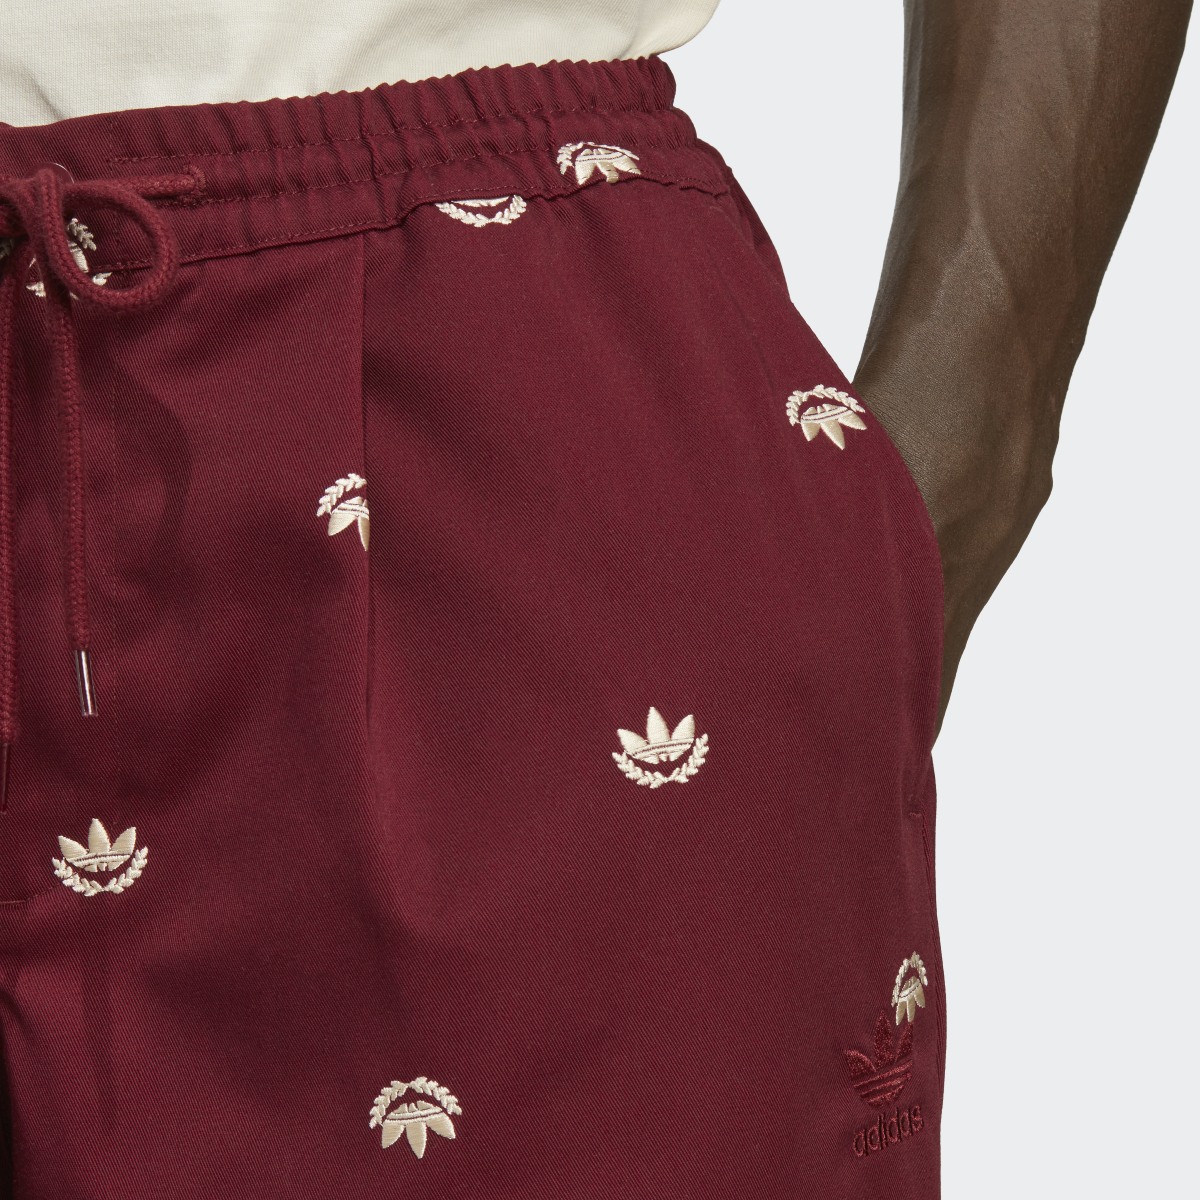 Adidas Graphics Archive Chino Trousers. 5